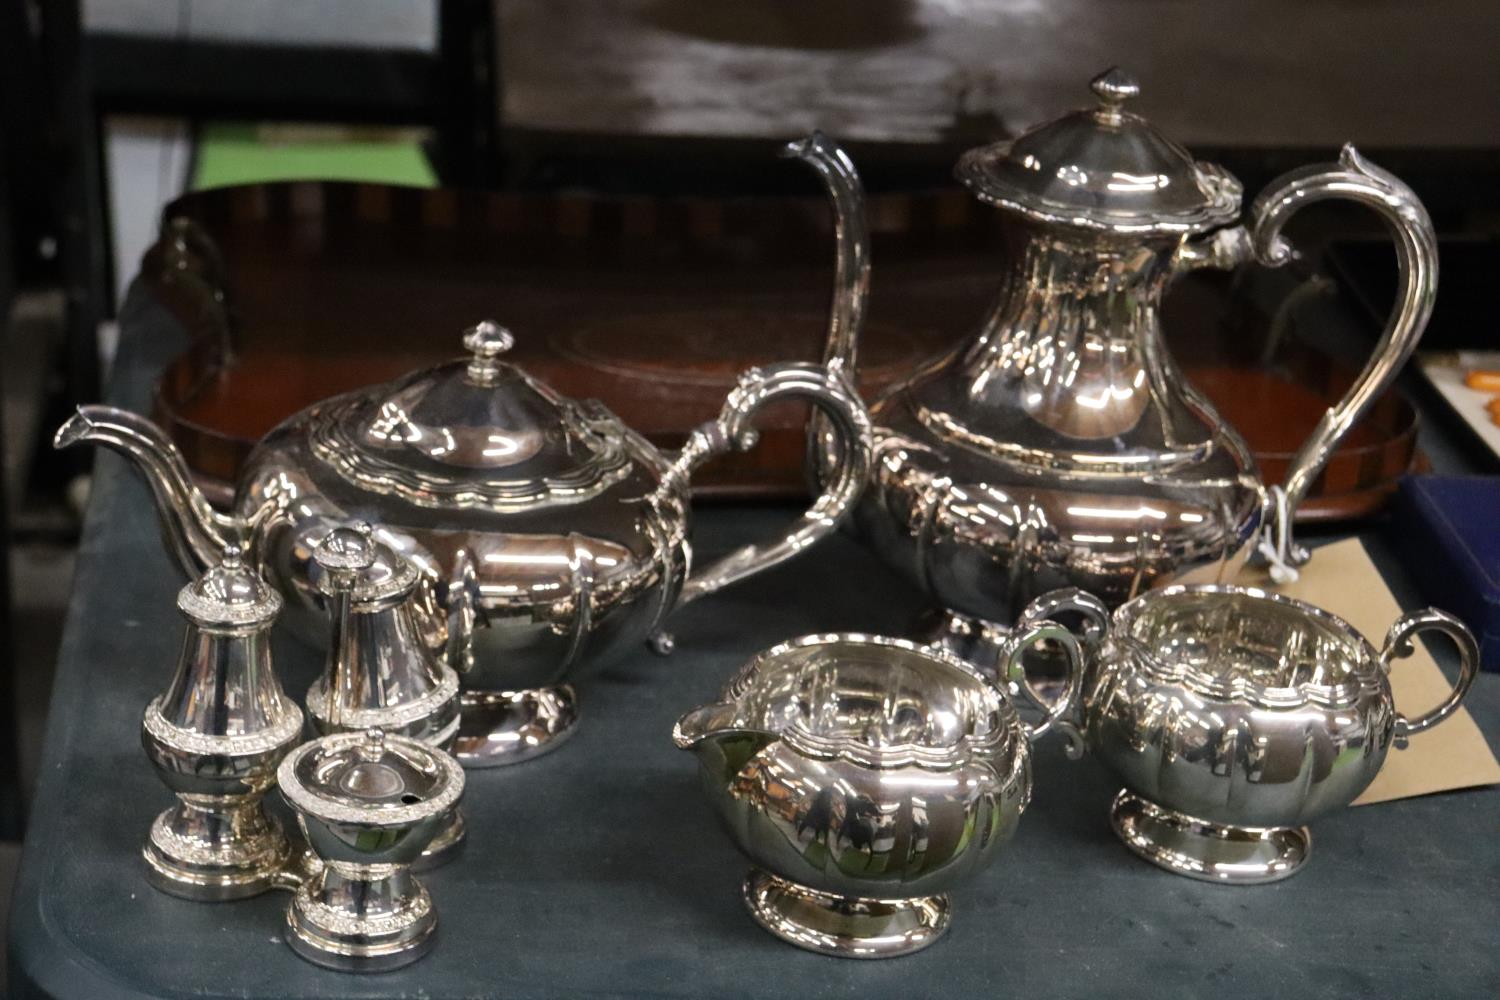 A SILVER PLATED TEASET TO INCLUDE A TEAPOT, COFFEE POT, SUGAR BOWL, CREAM JUG AND A CRUET SET - Image 5 of 5